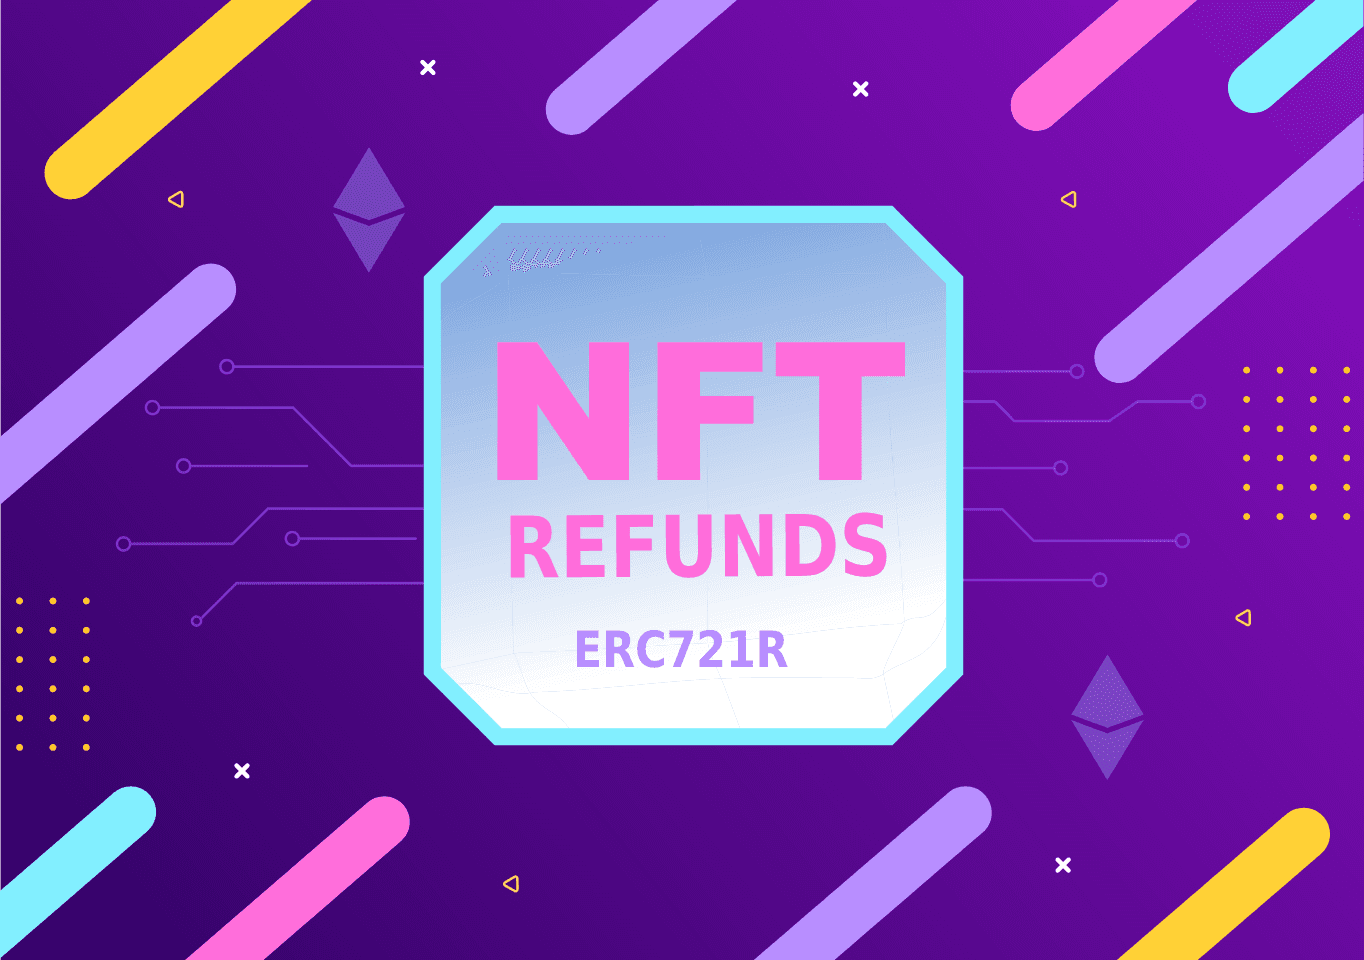 erc721r supports nft refunds bring accountability for nft smart contract with trustless refunds